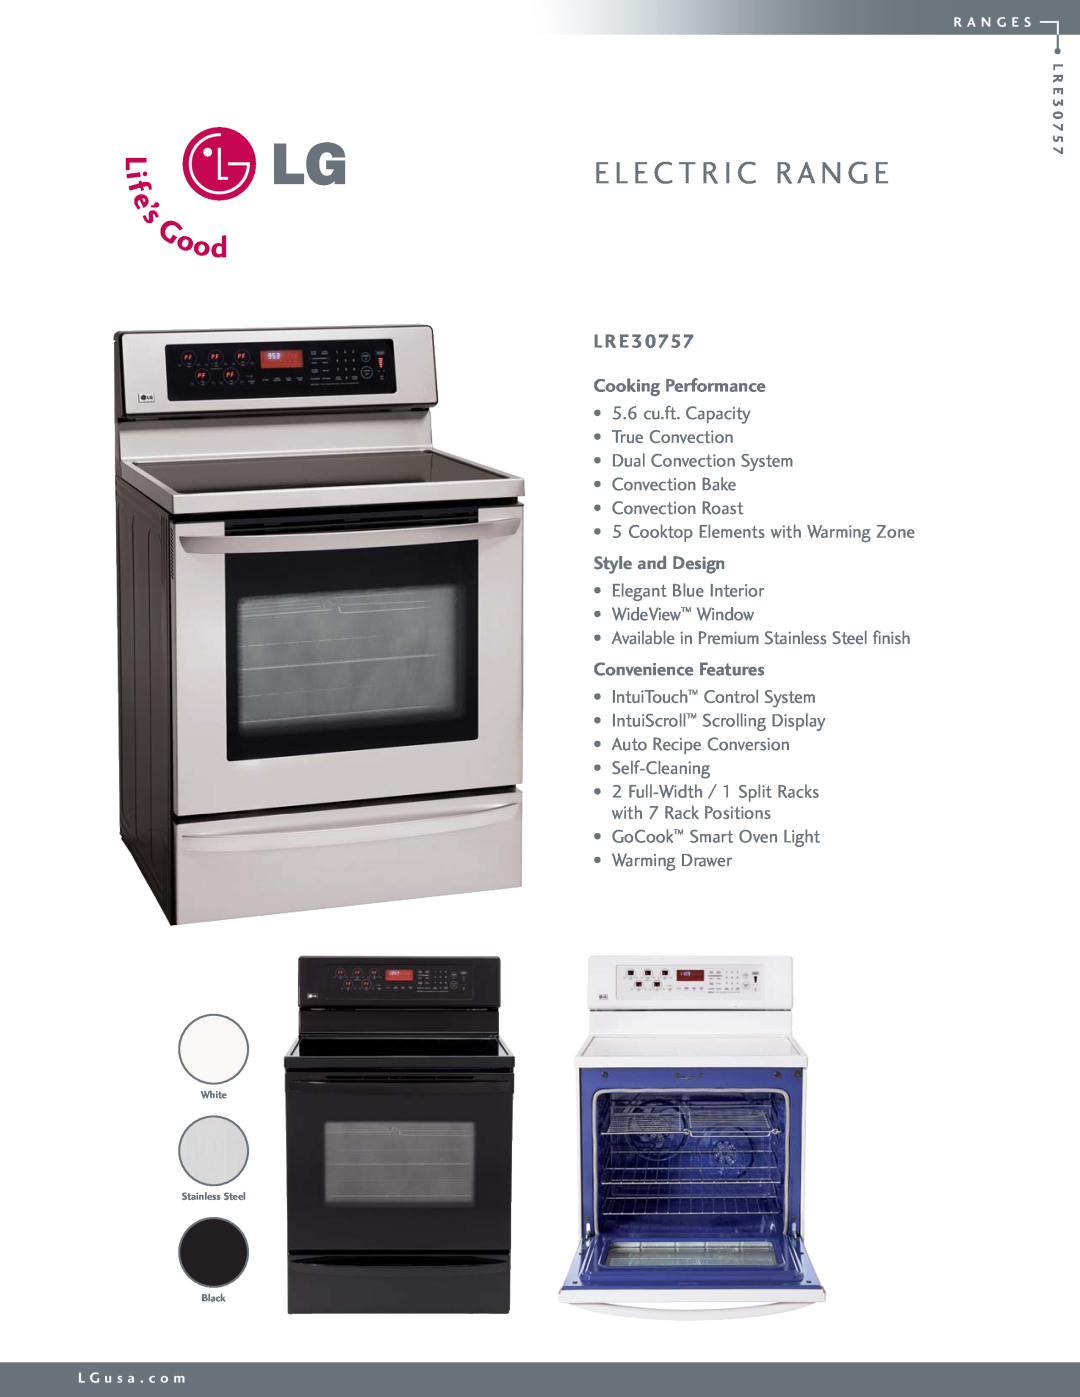 LG Electronics LRE30757 manual L R E, E L E C T R I C R A N G E, Cooking Performance, Style and Design 